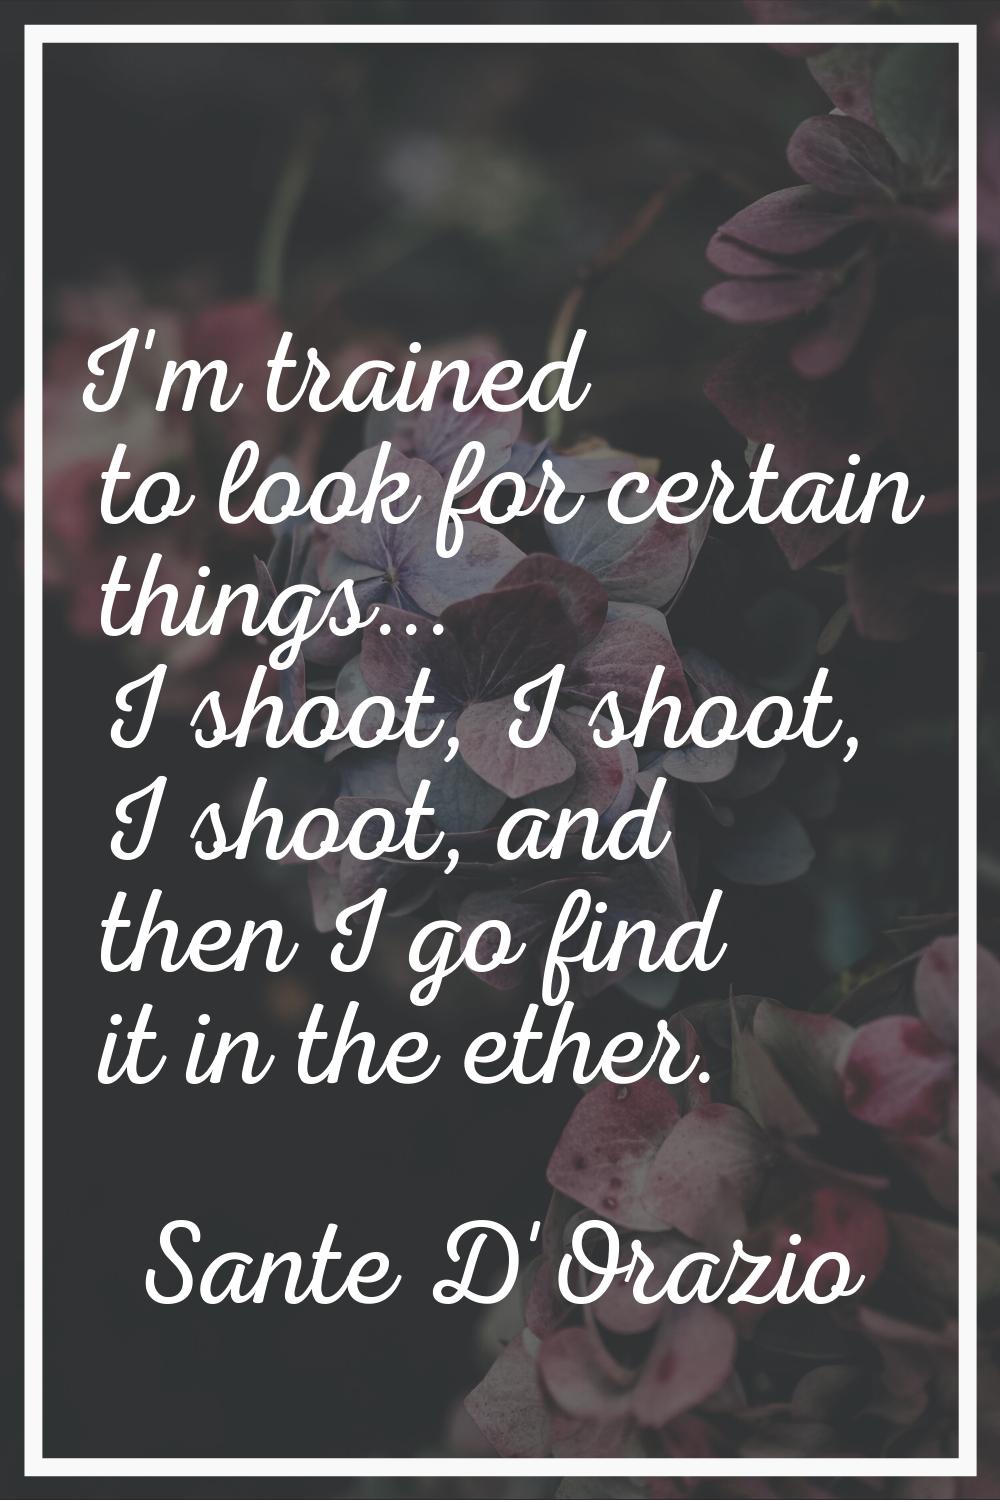 I'm trained to look for certain things... I shoot, I shoot, I shoot, and then I go find it in the e